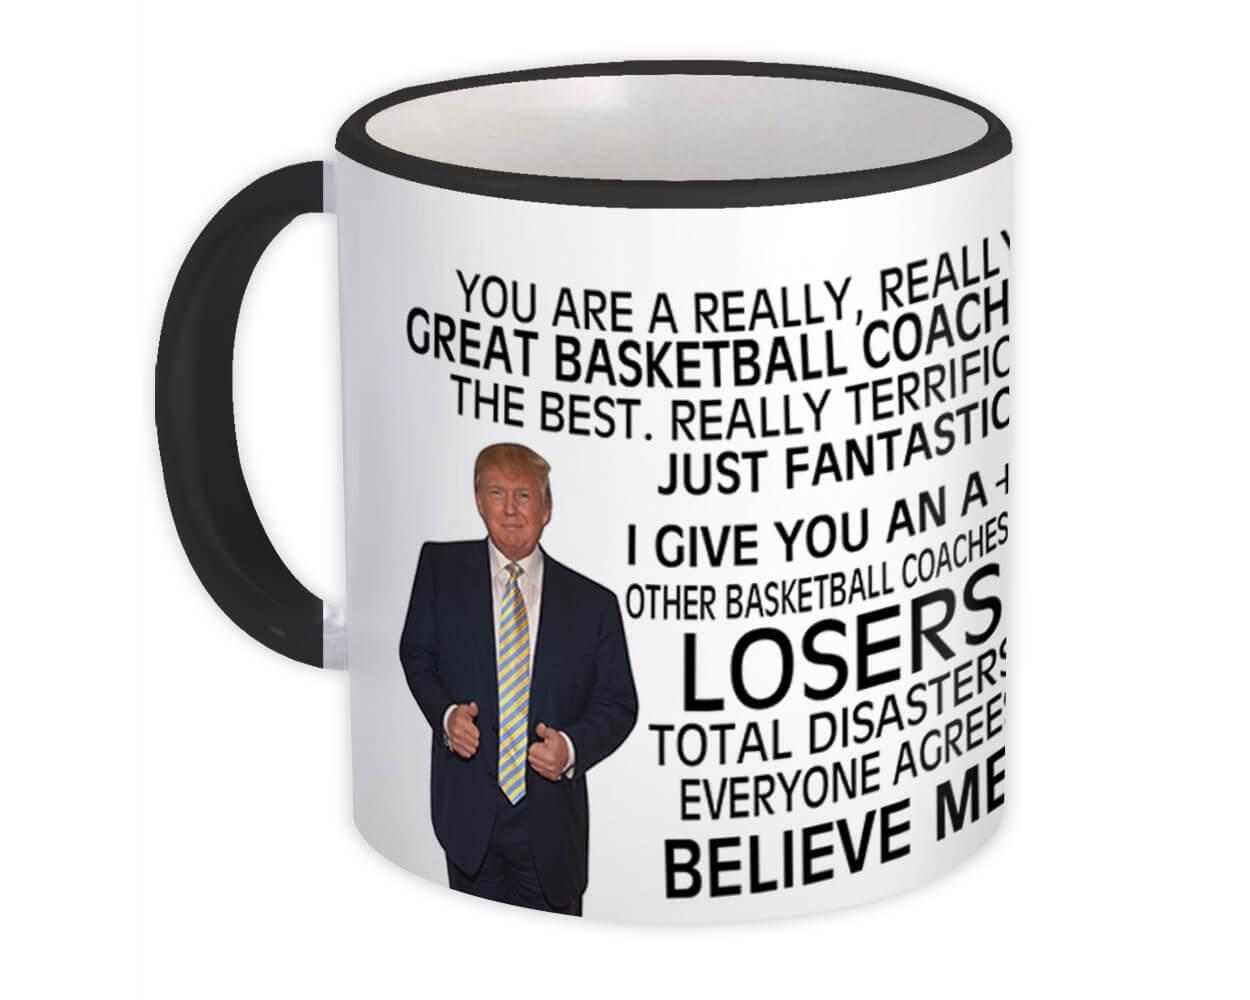 Primary image for Gift for Basketball Coach : Gift Mug Donald Trump Great Basketball Coach Funny C